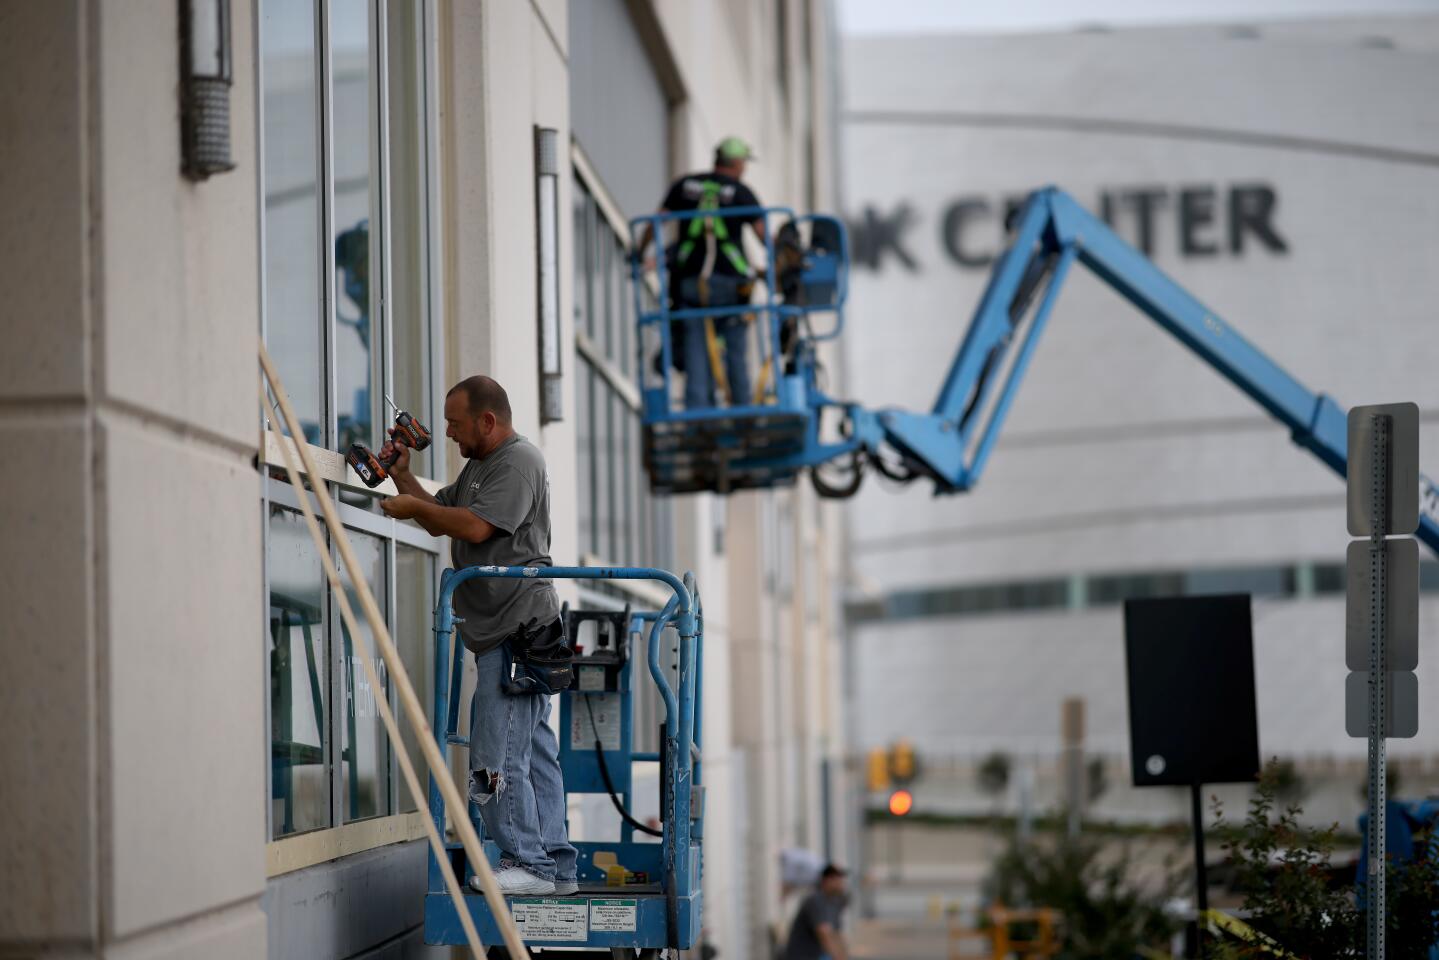 Workers attach plywood to a store front near the BOK Center in Tulsa in advance of a Trump campaign rally.